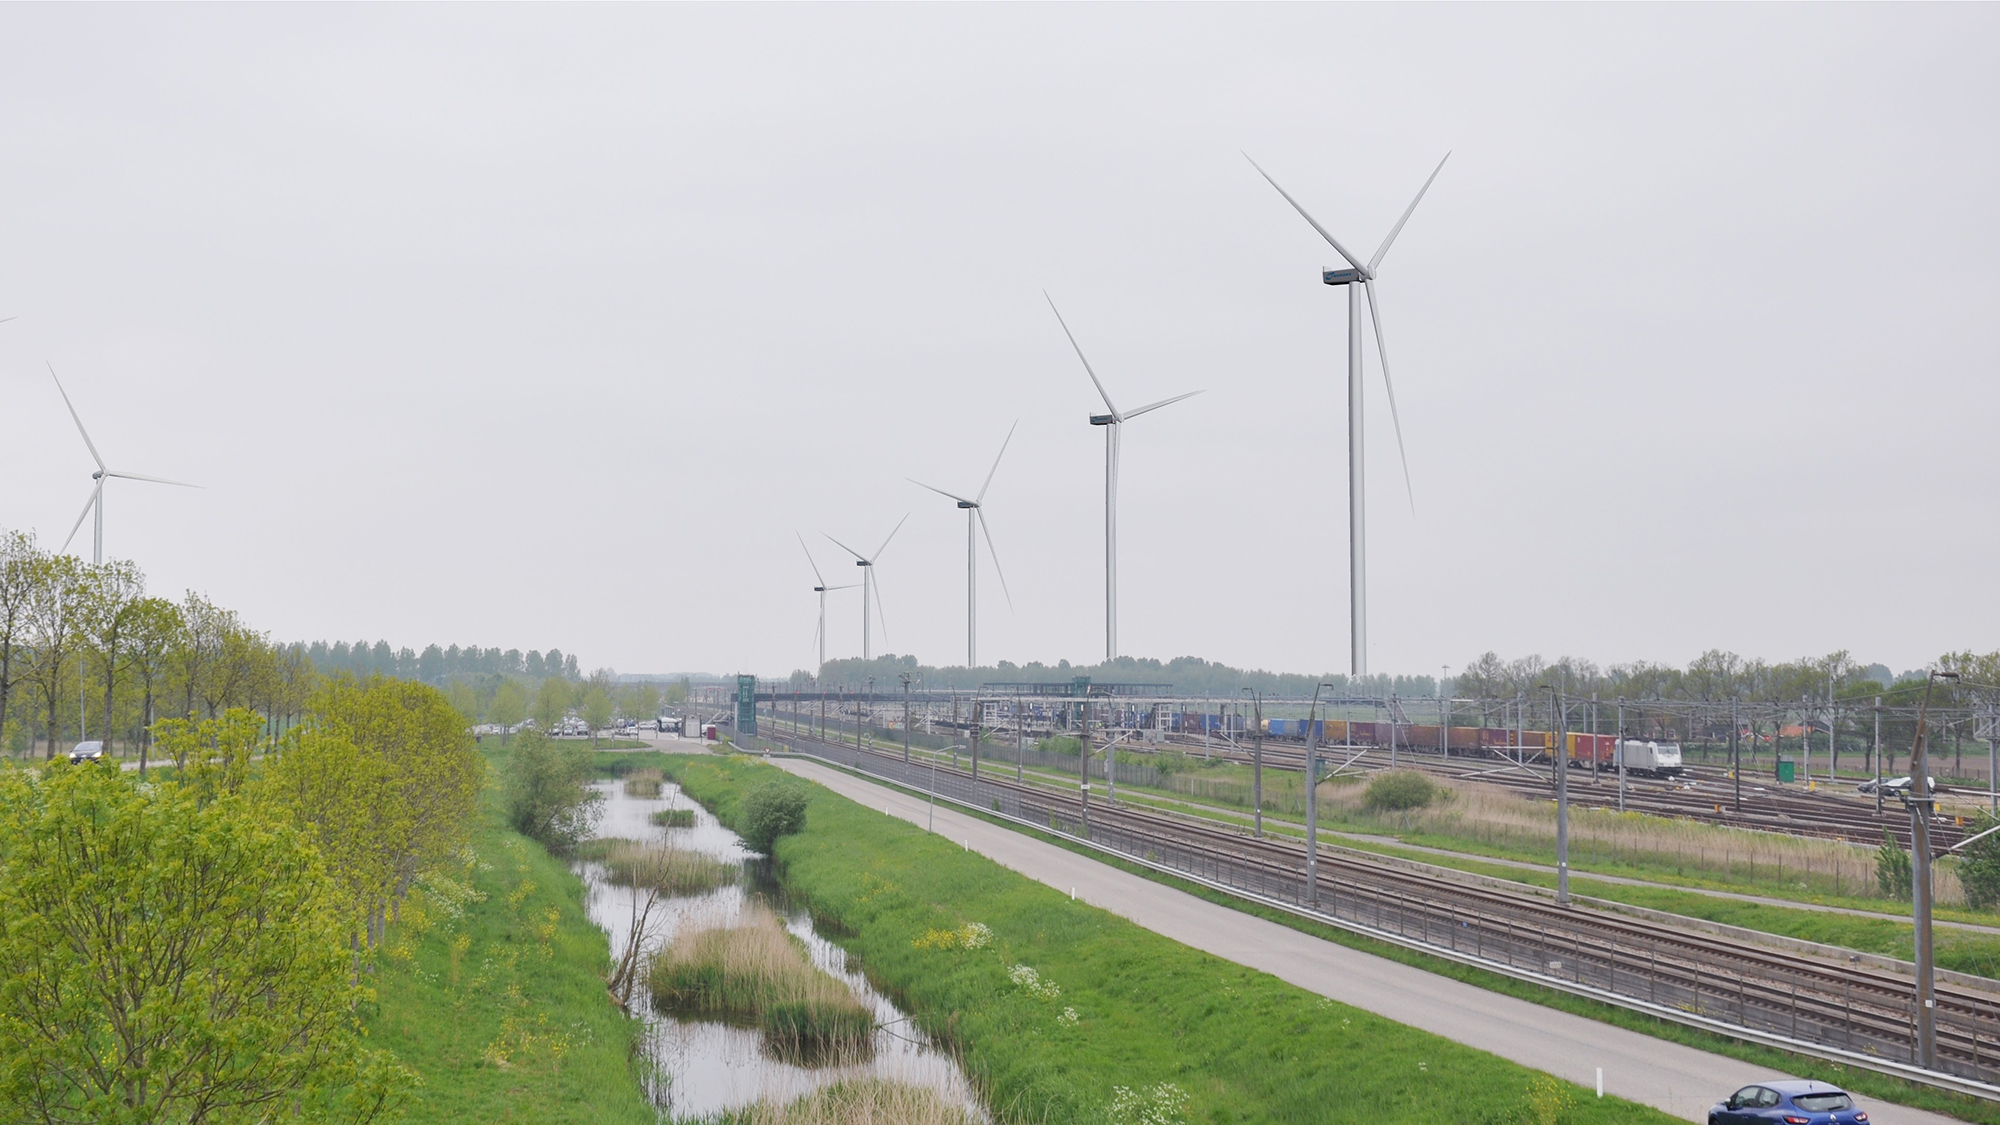 Wind farm Klaverspoor - how it will look when completed